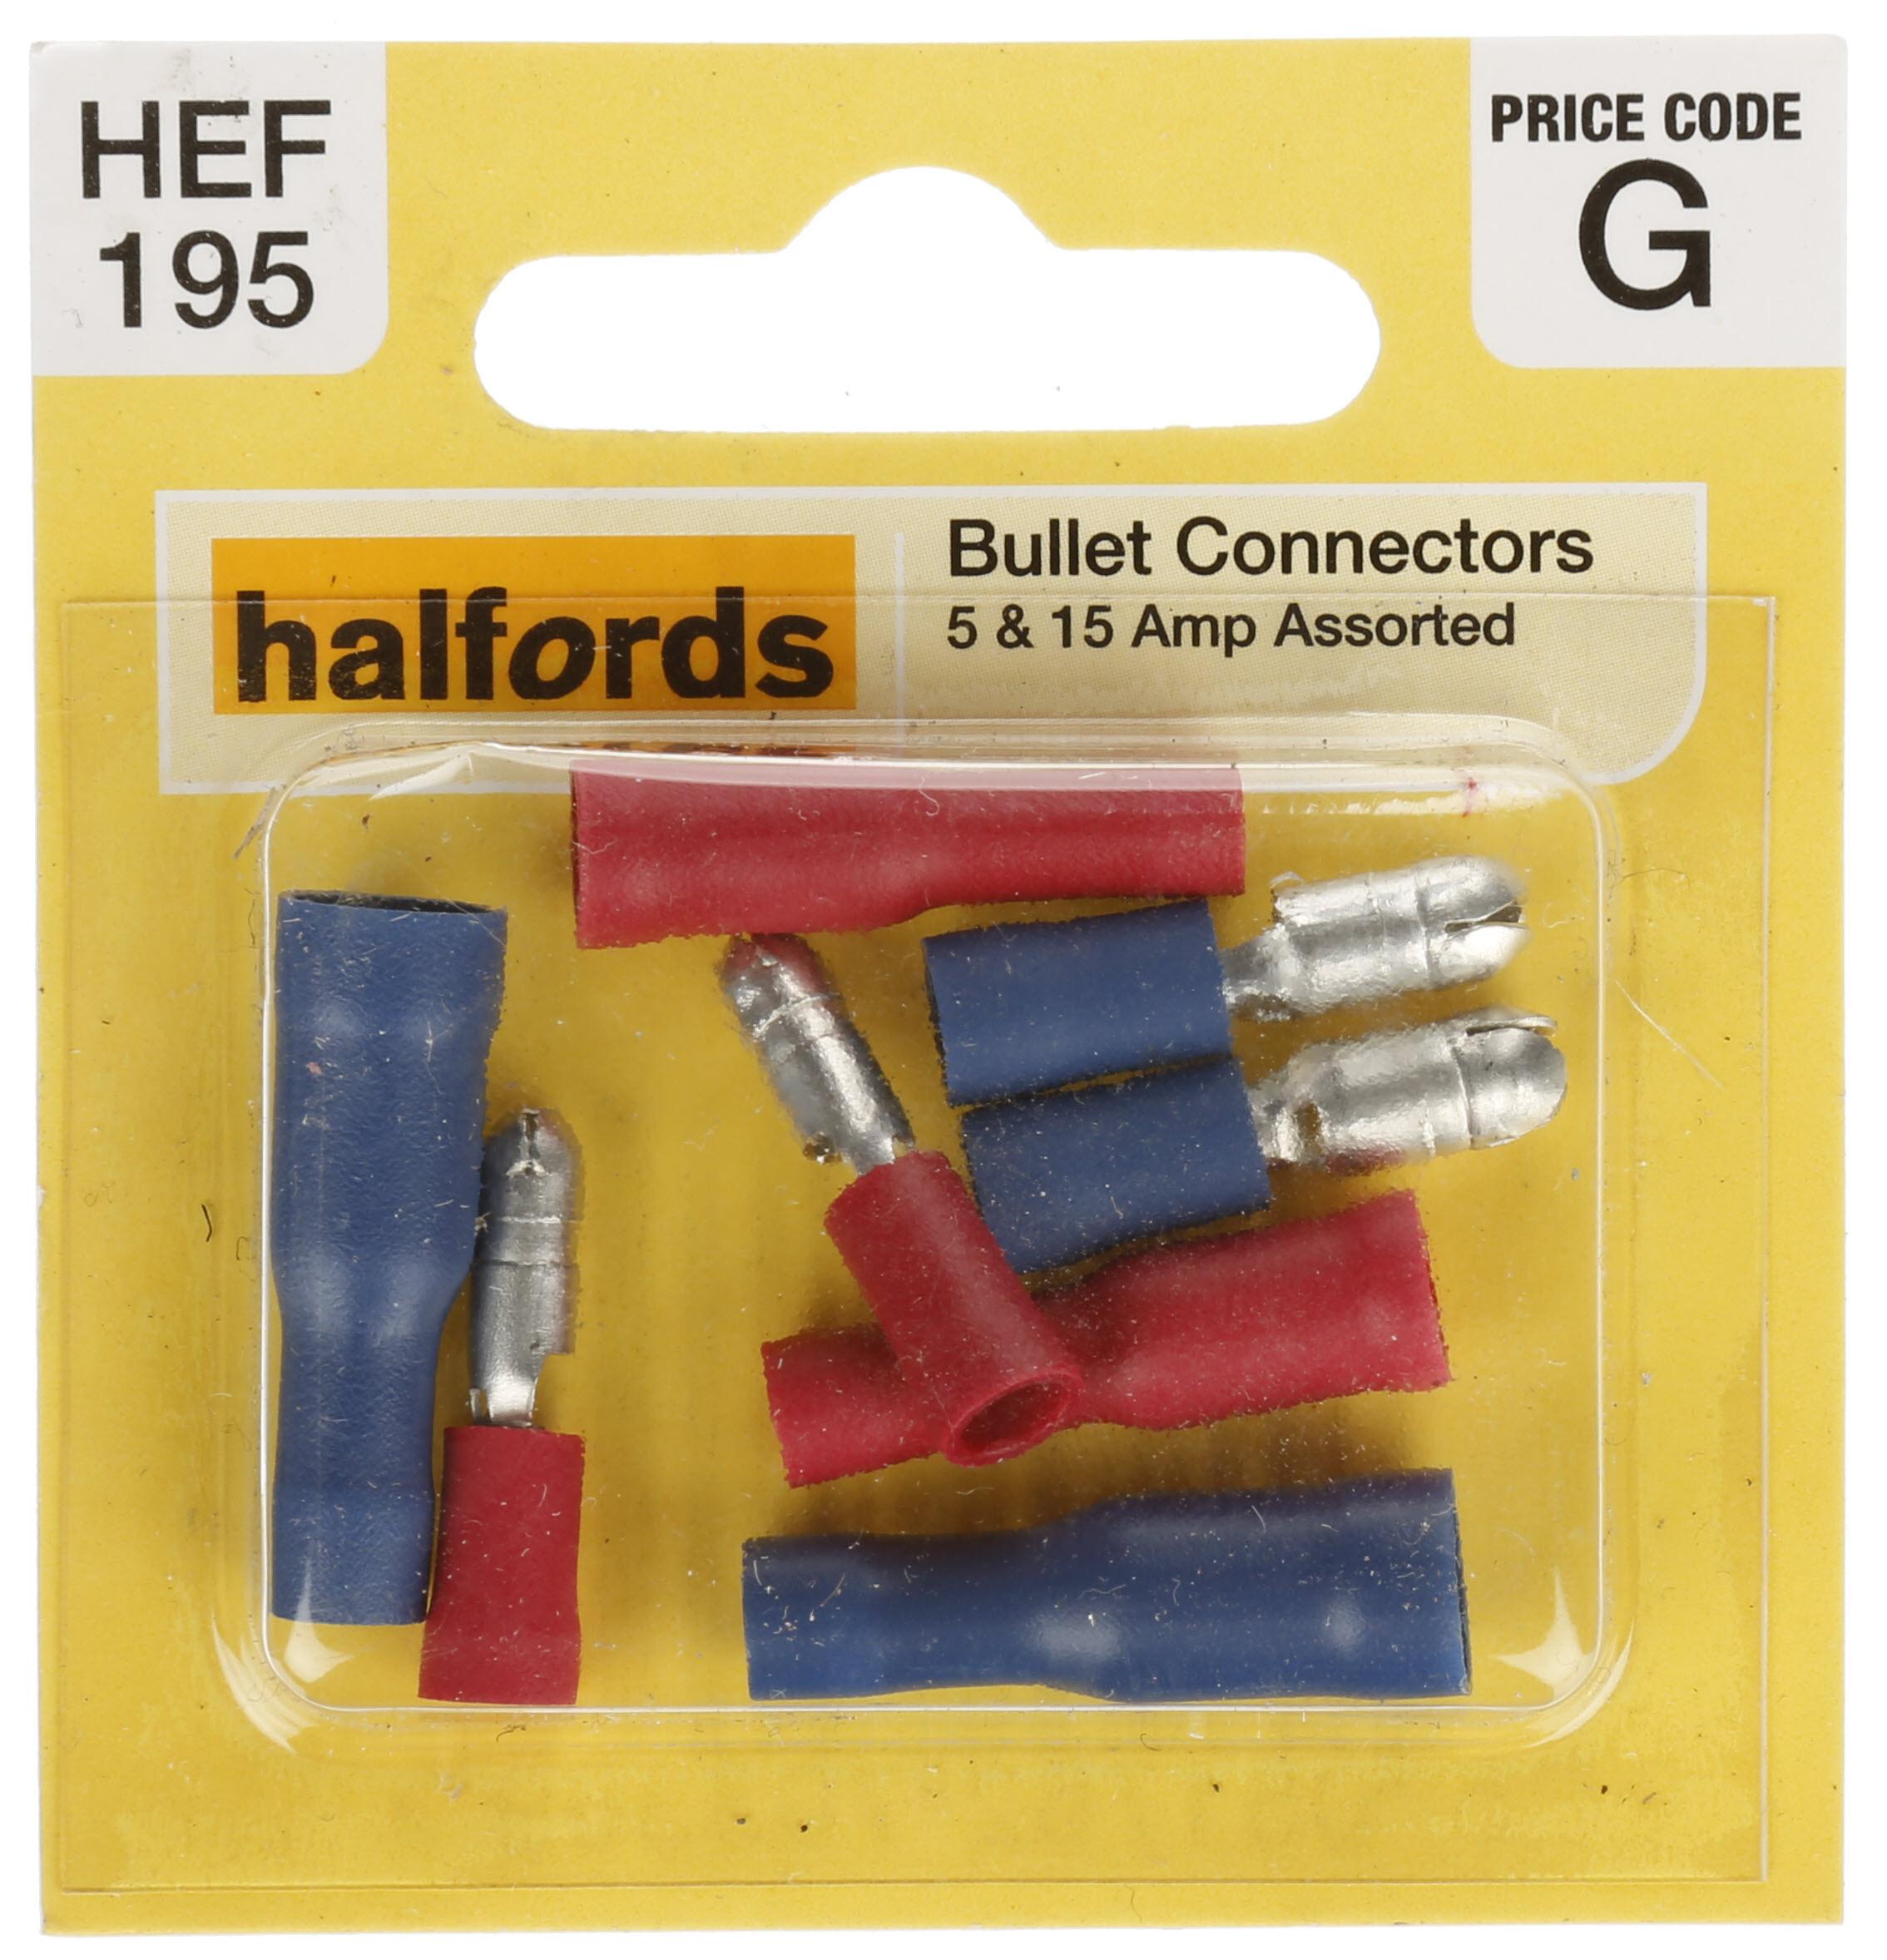 Halfords Assorted Male & Female Bullet Connectors 5 & 15 Amp (Hef195)